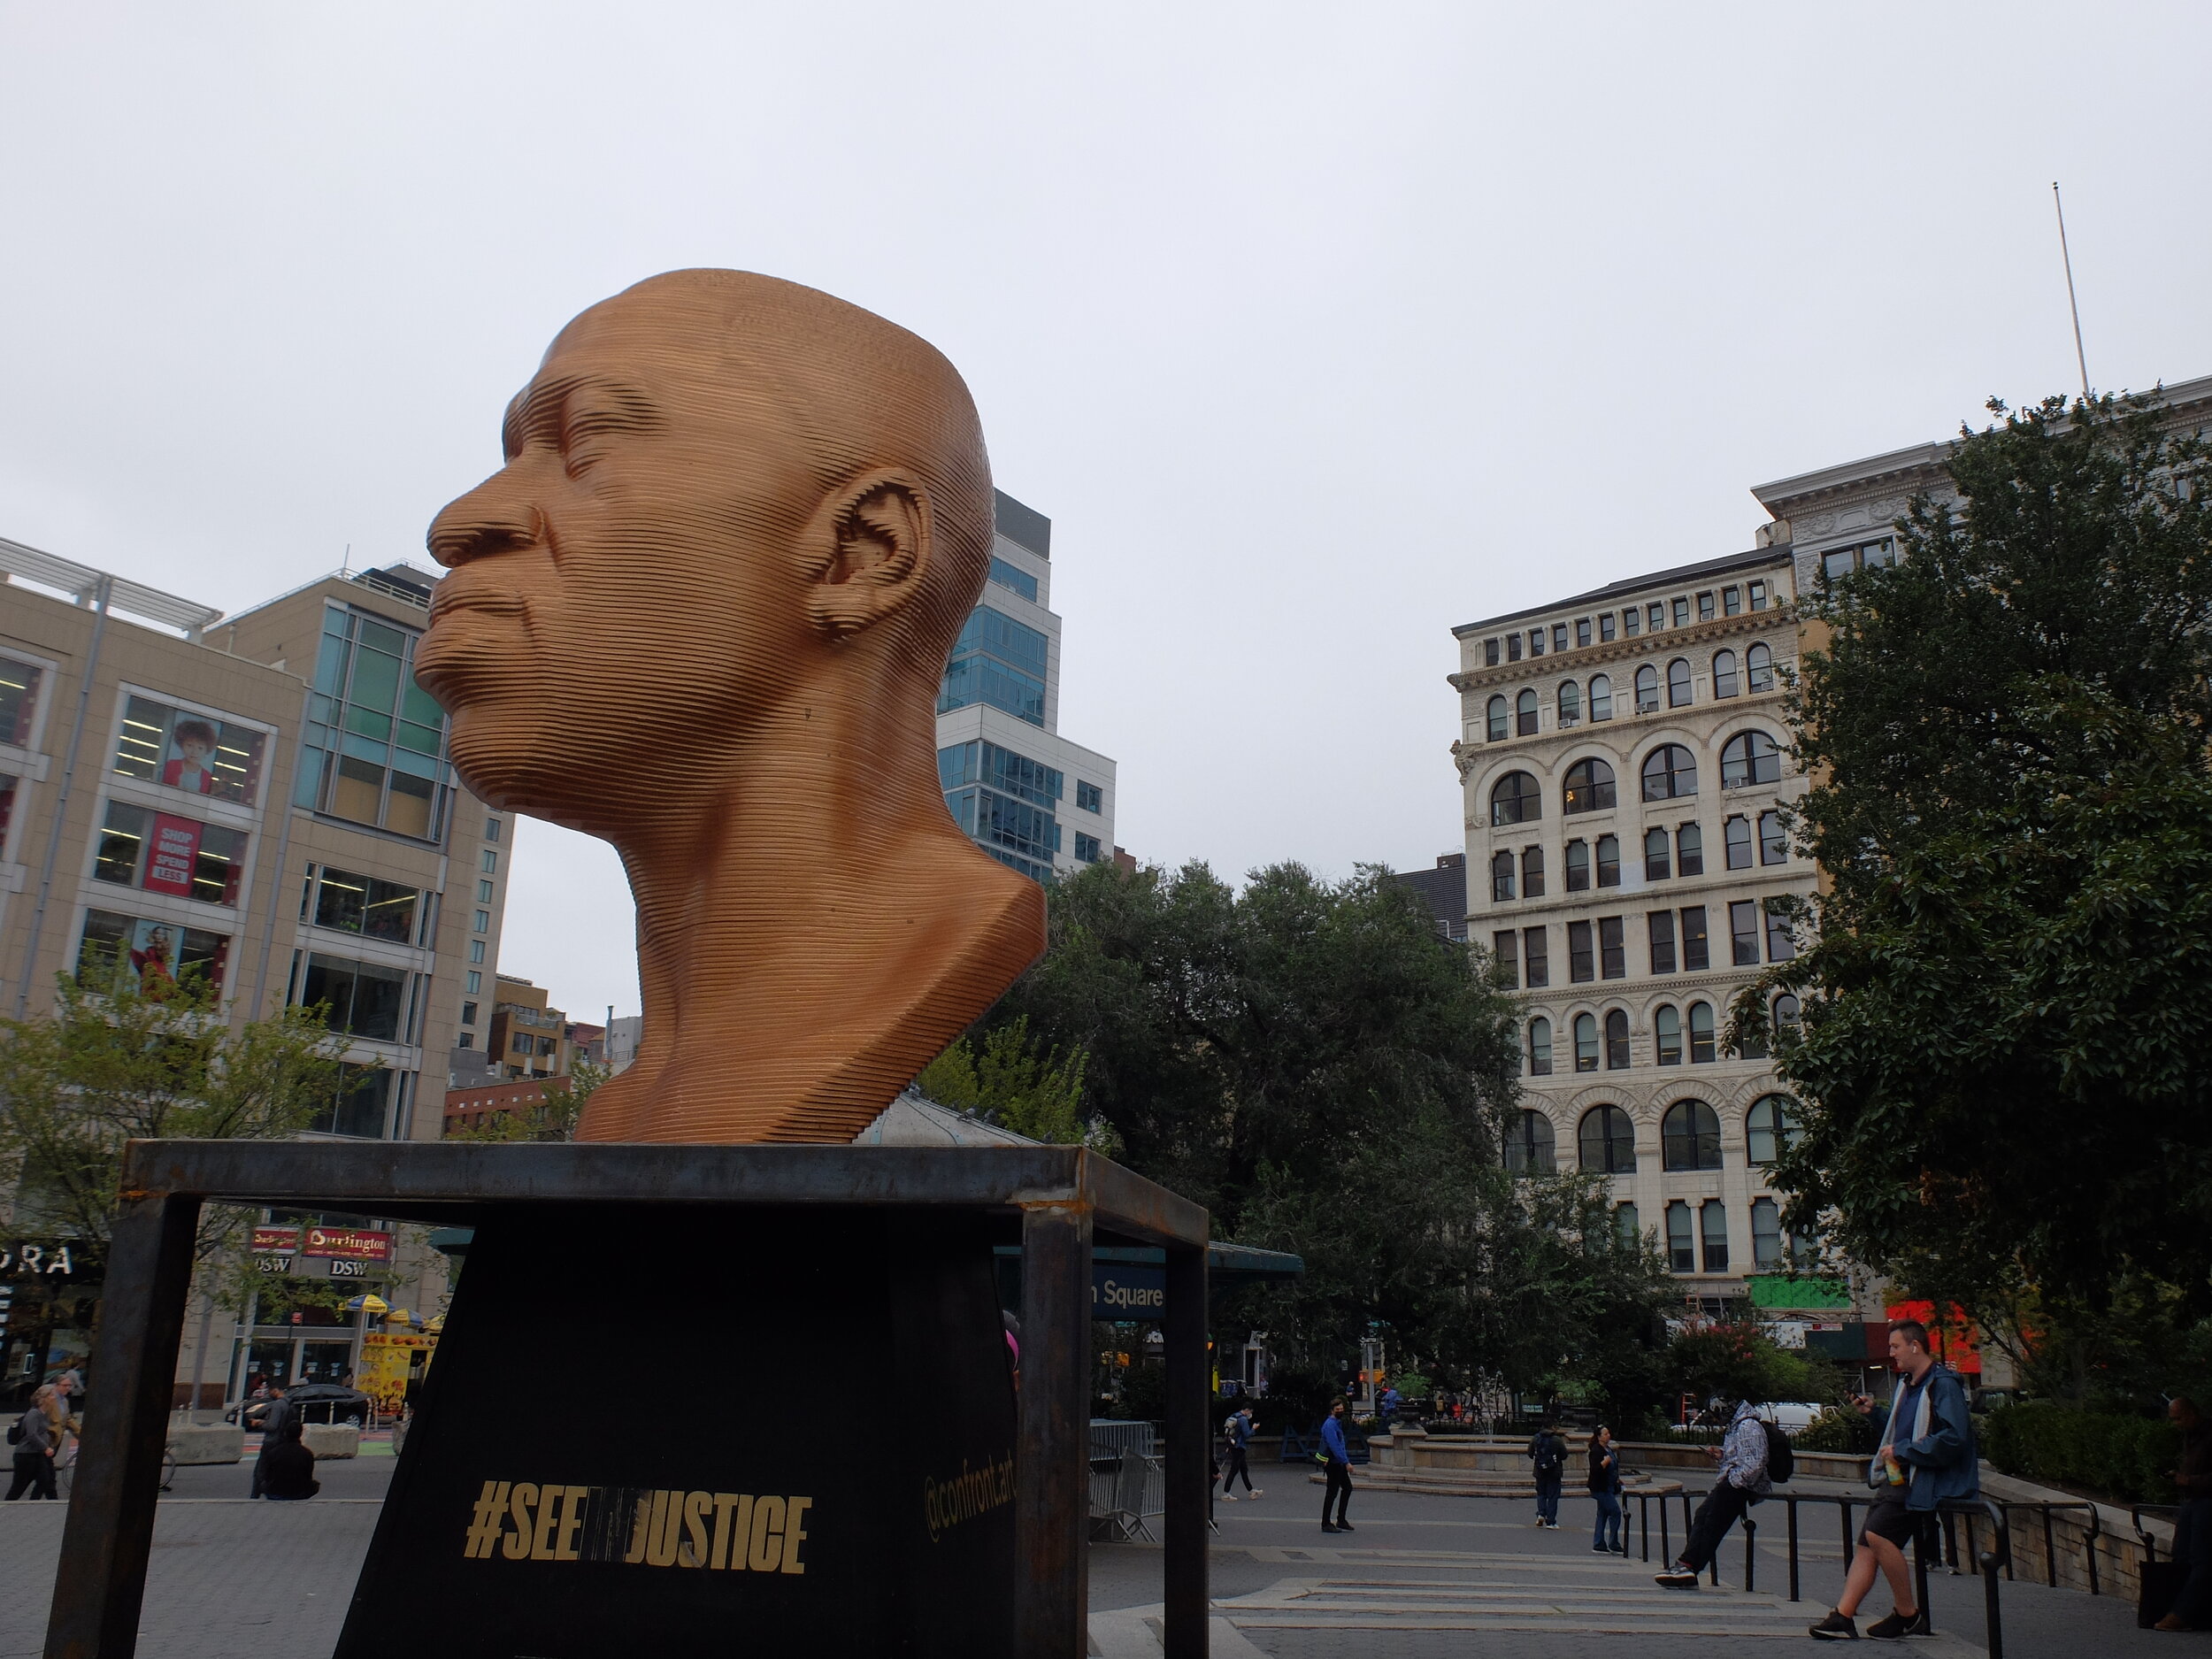 The day before George Floyd's bust had been vsndalized with grey paint.  It  had been cleaned overnight